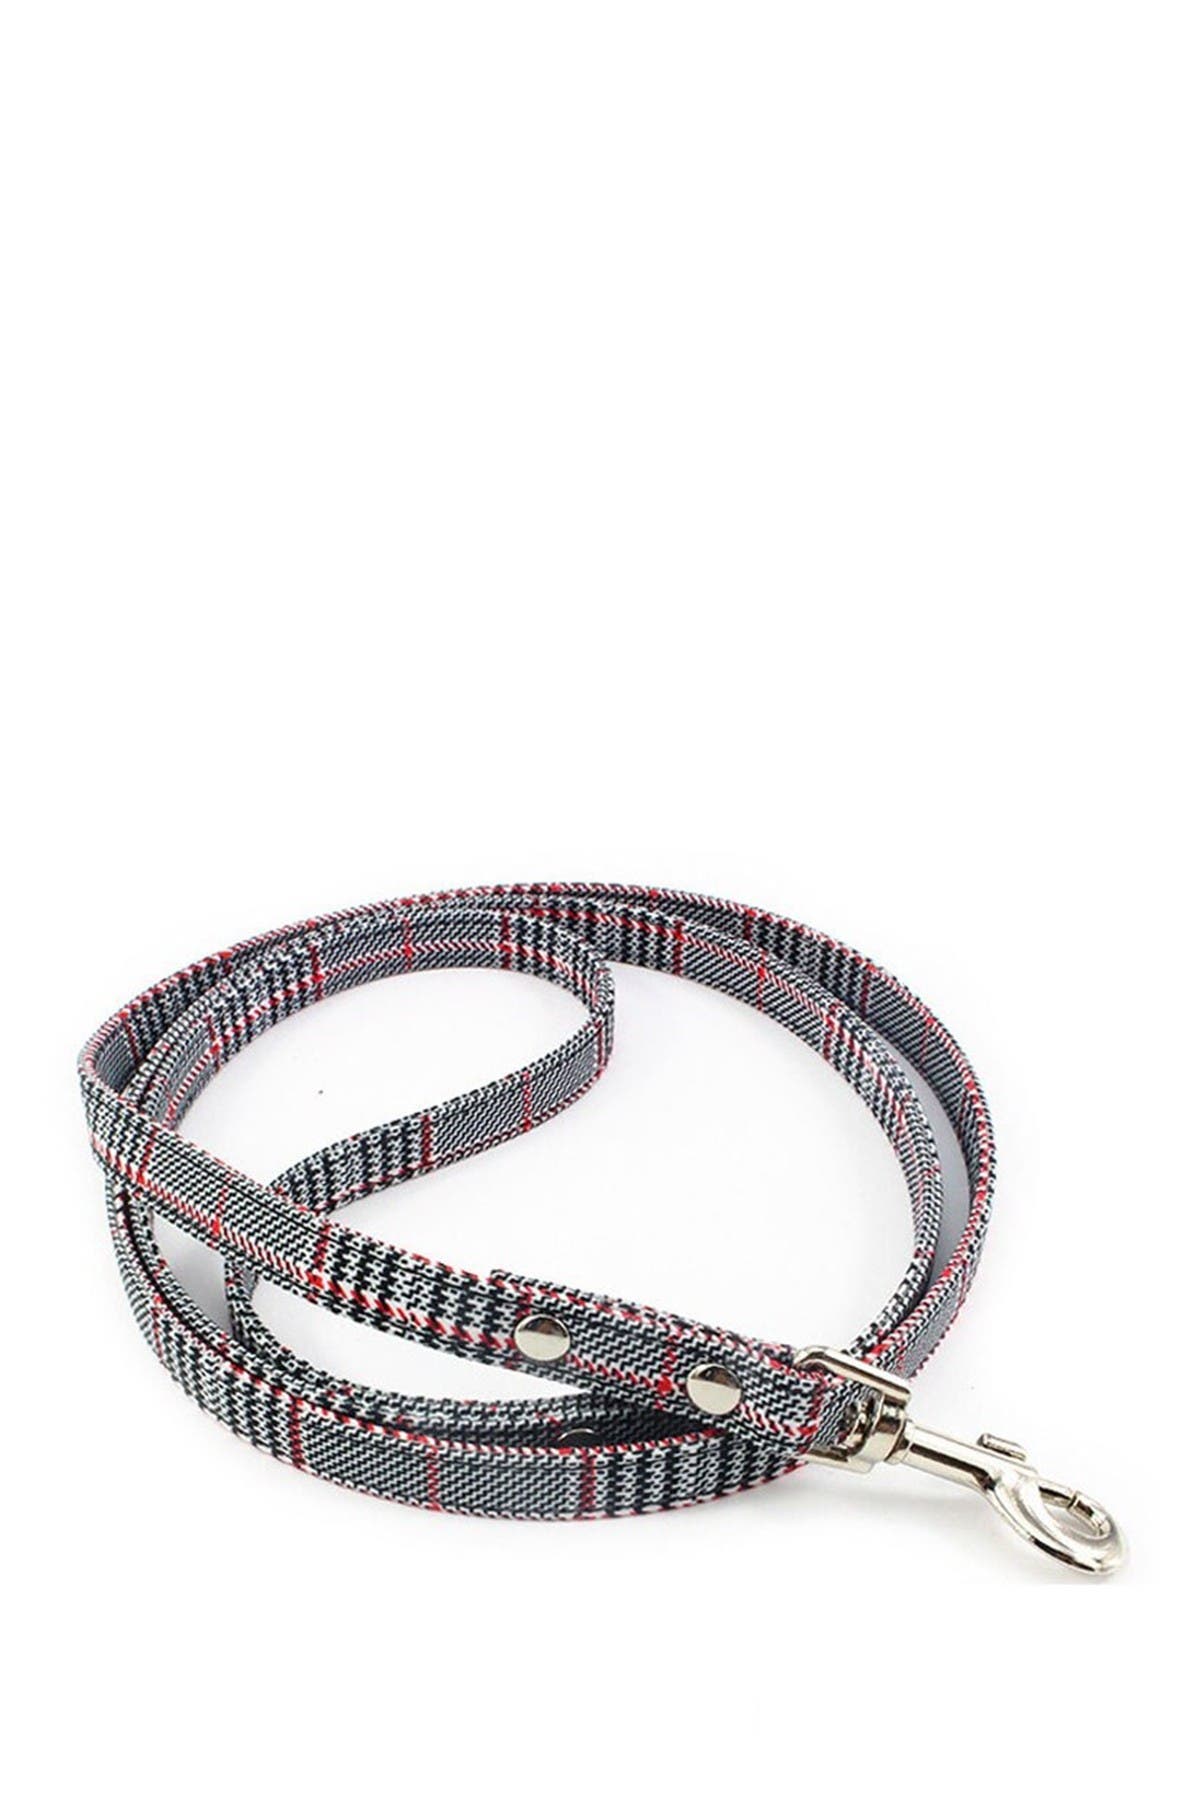 Dogs Of Glamour Rexford Leash In Multi